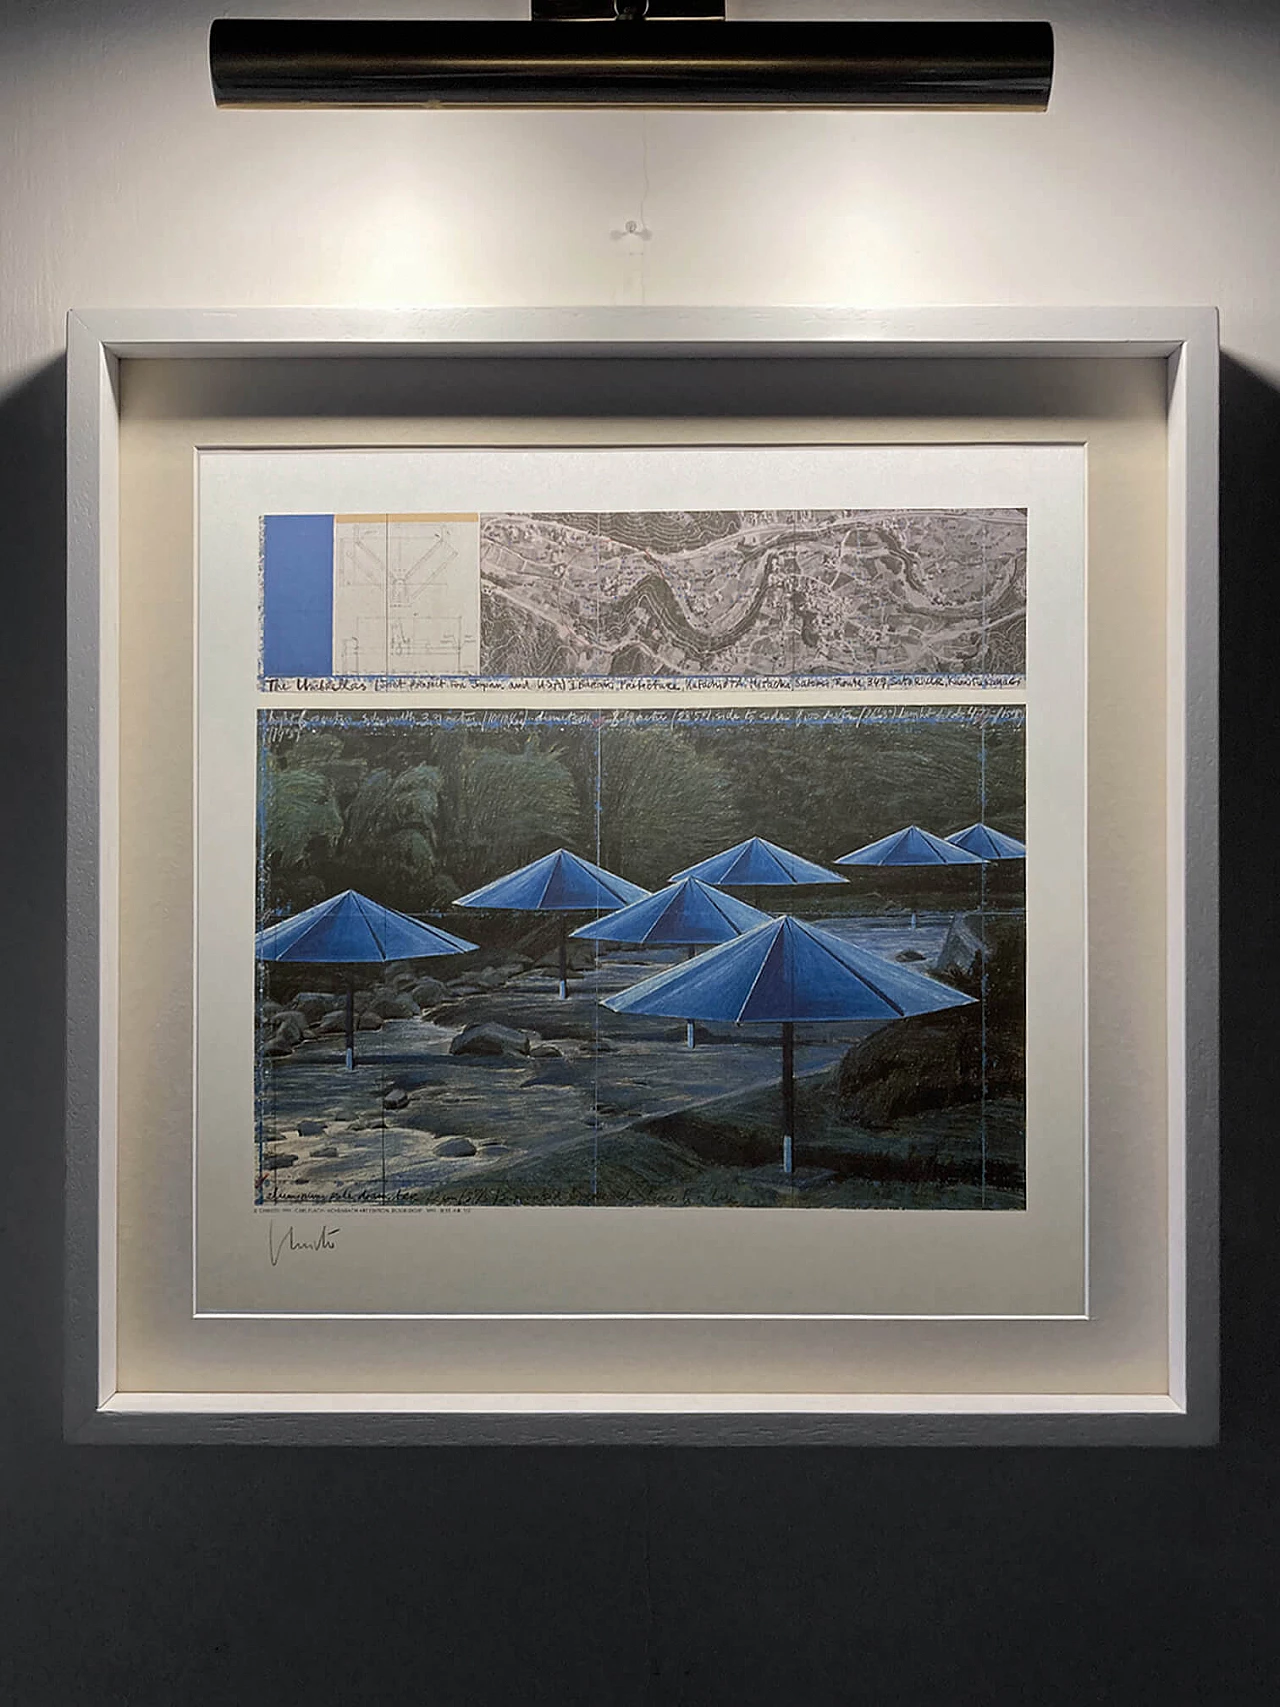 Christo, The Umbrellas - Joint Project for Japan and USA, lithograph, 1991 2